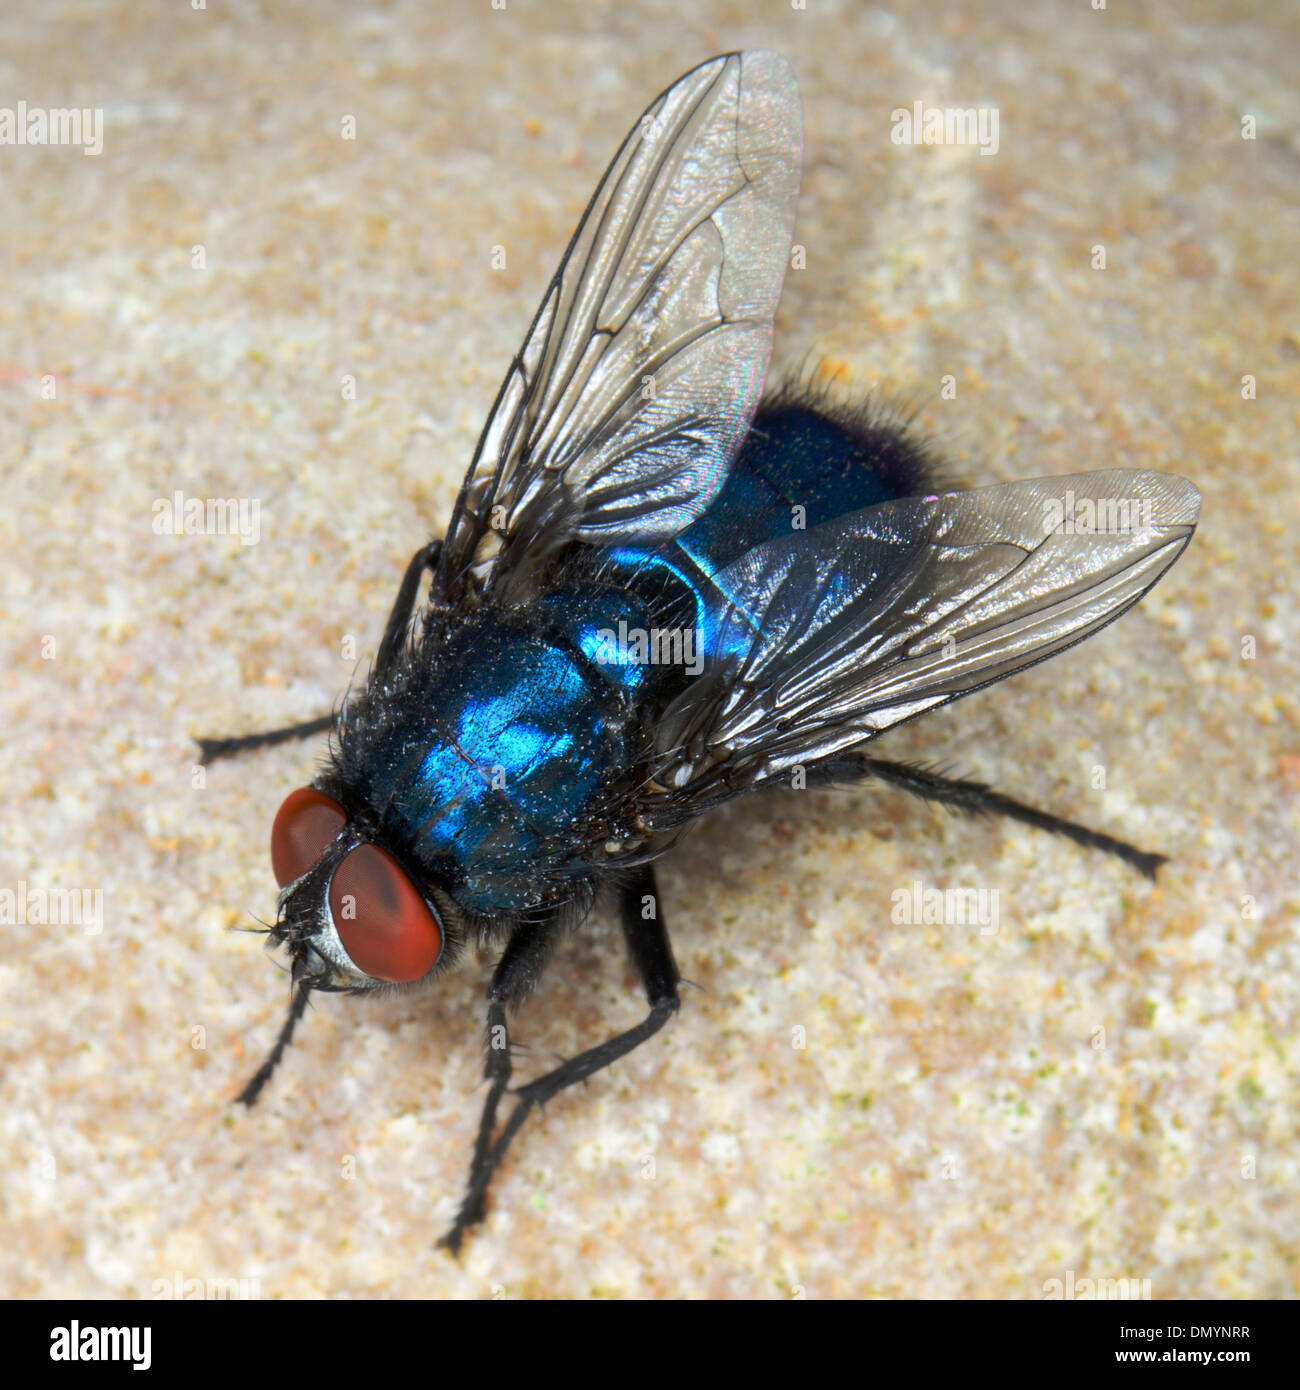 Close up of a Common bluebottle or blowfly,Calliphora vomitoria Stock Photo